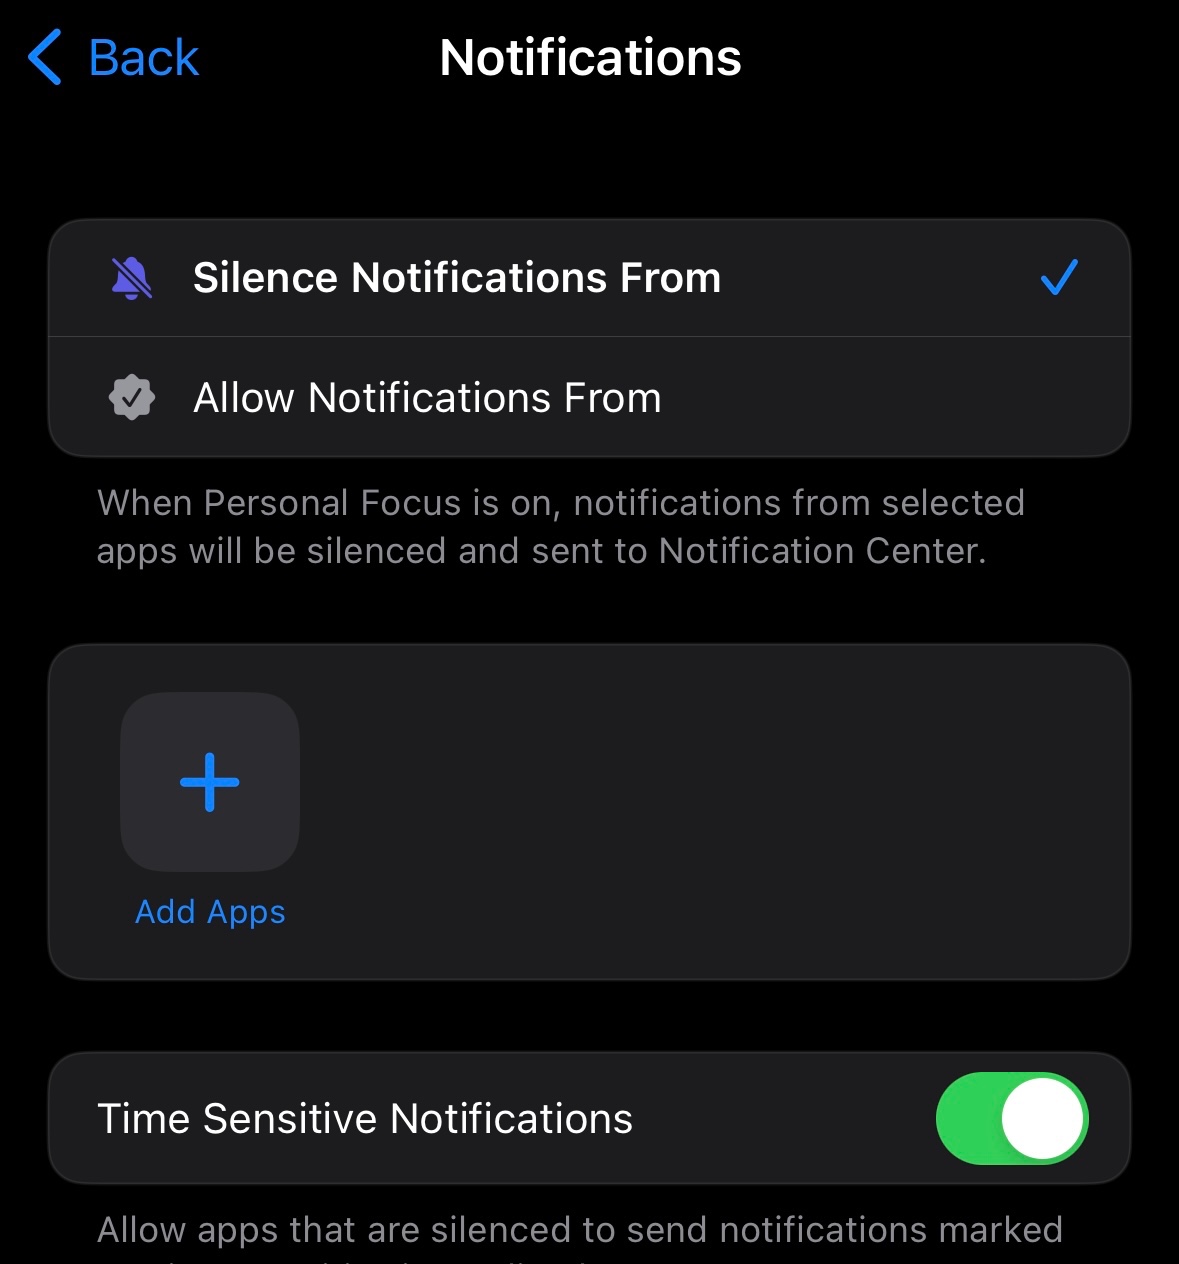 Focus silencing notifications incorrectly - Apple Community